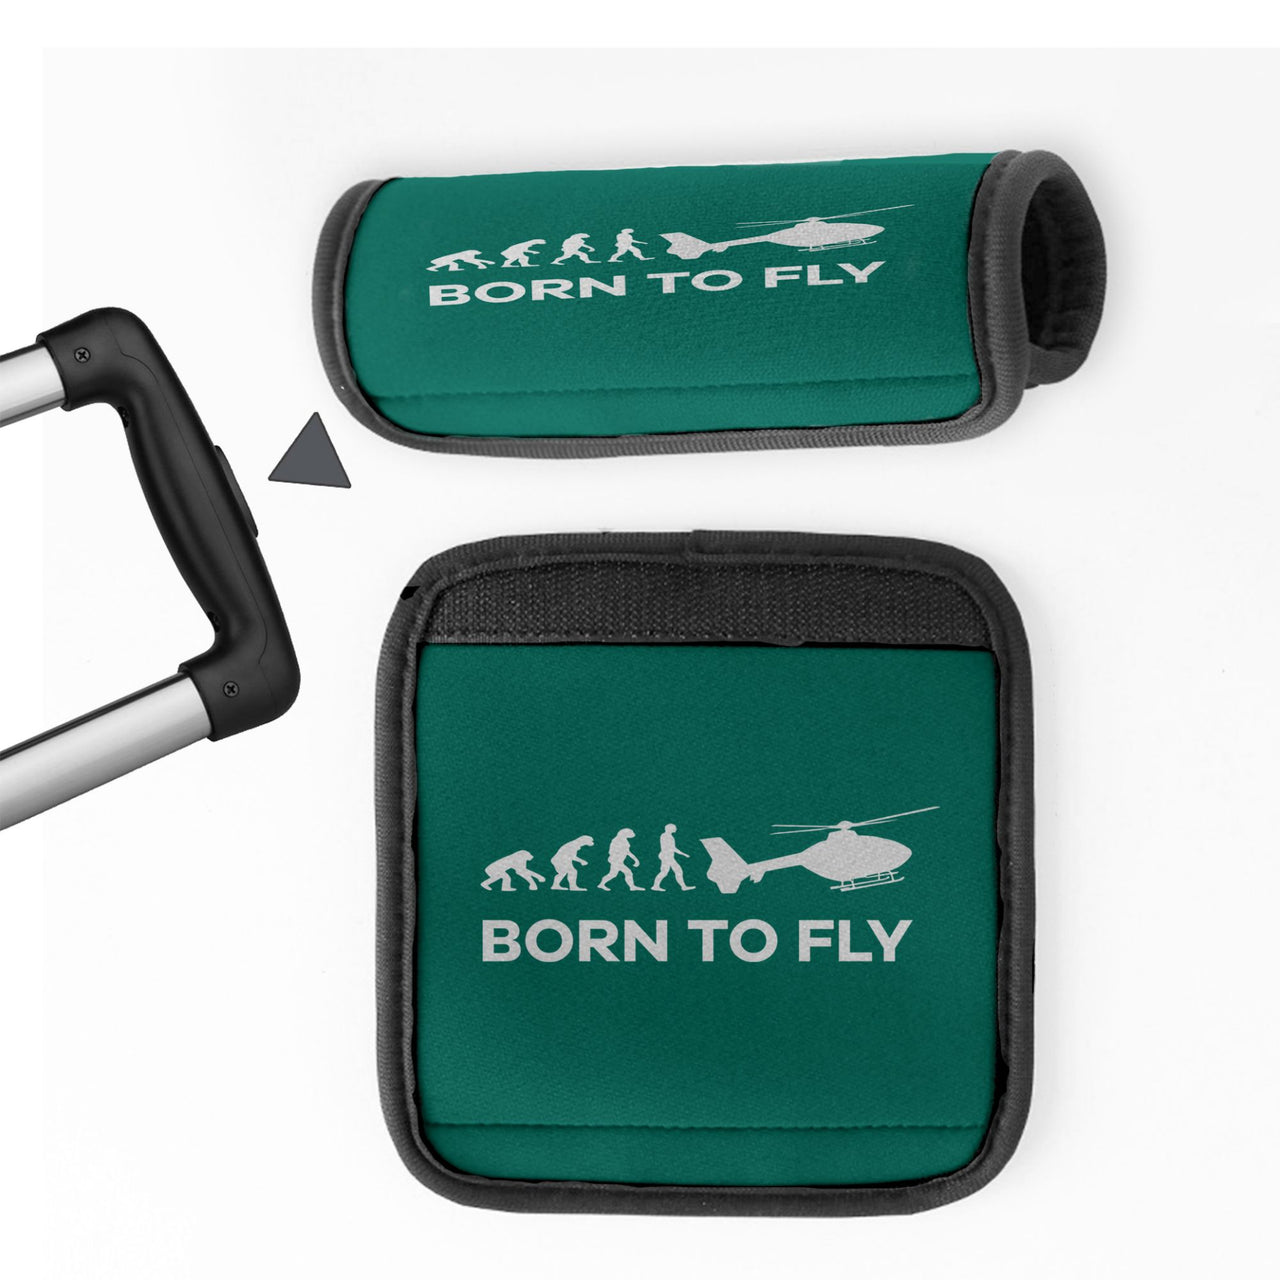 Born To Fly Helicopter Designed Neoprene Luggage Handle Covers